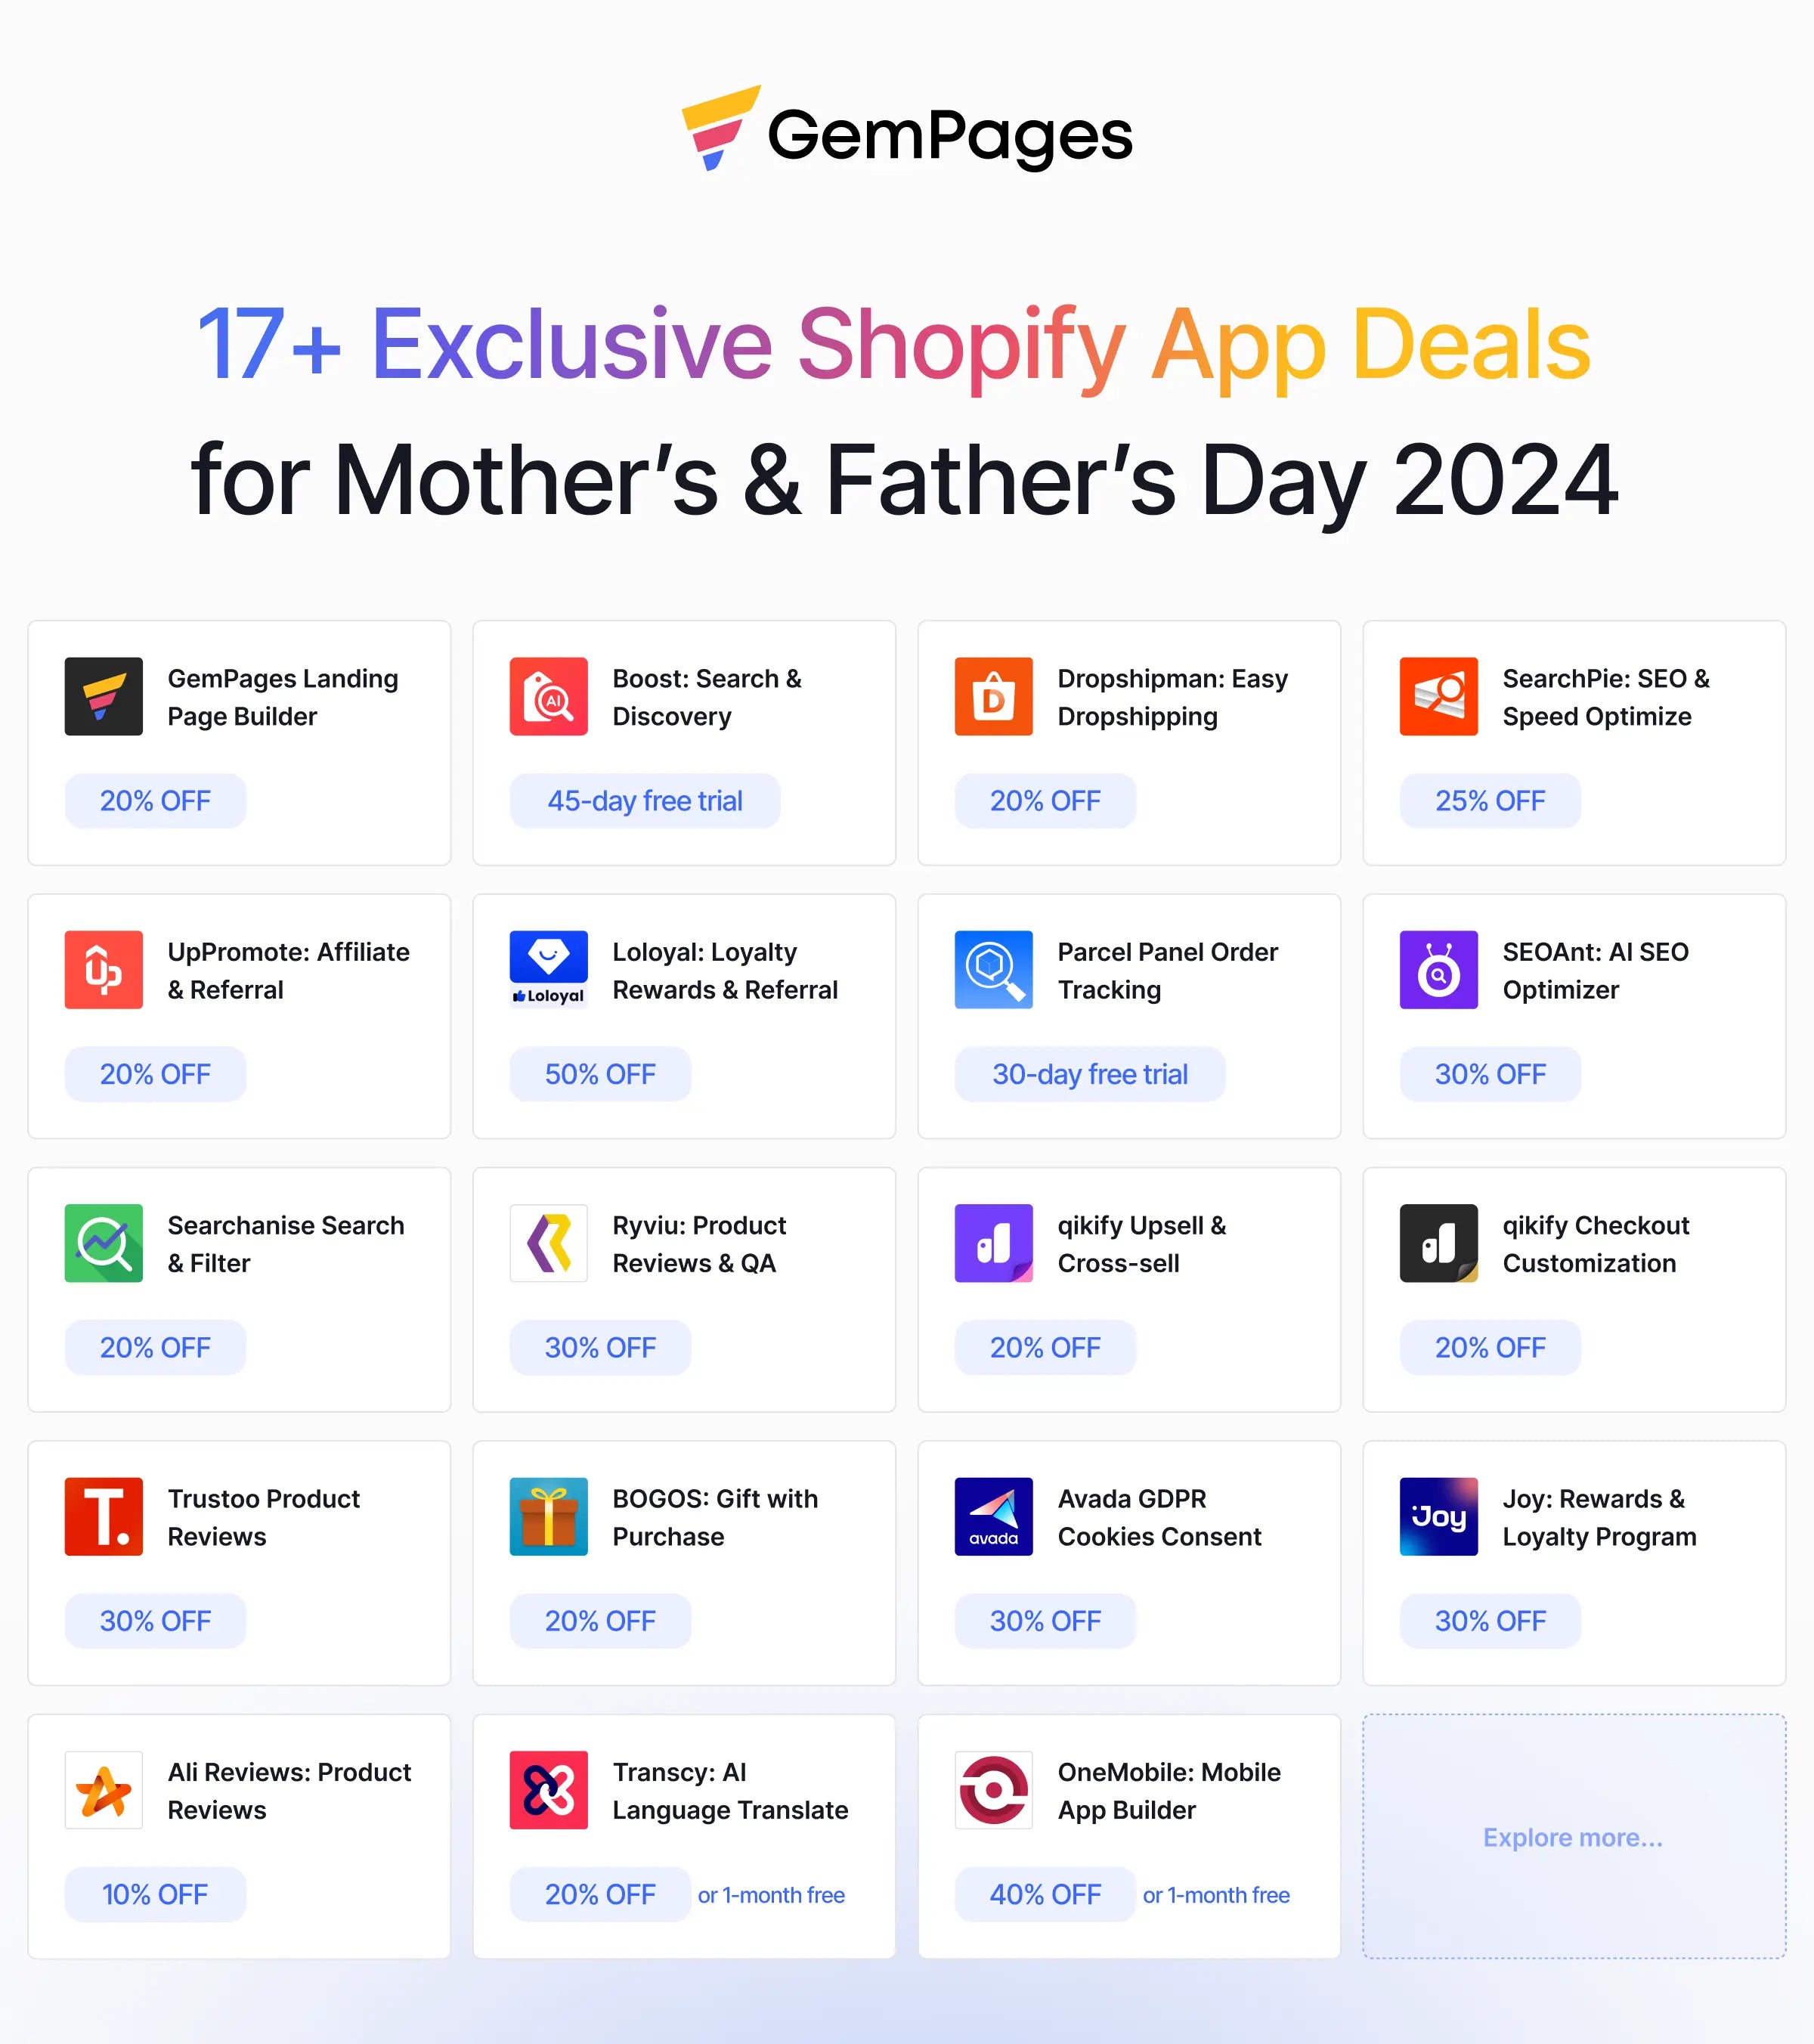 17+ Shopify app deals for Mother's and Father's Day